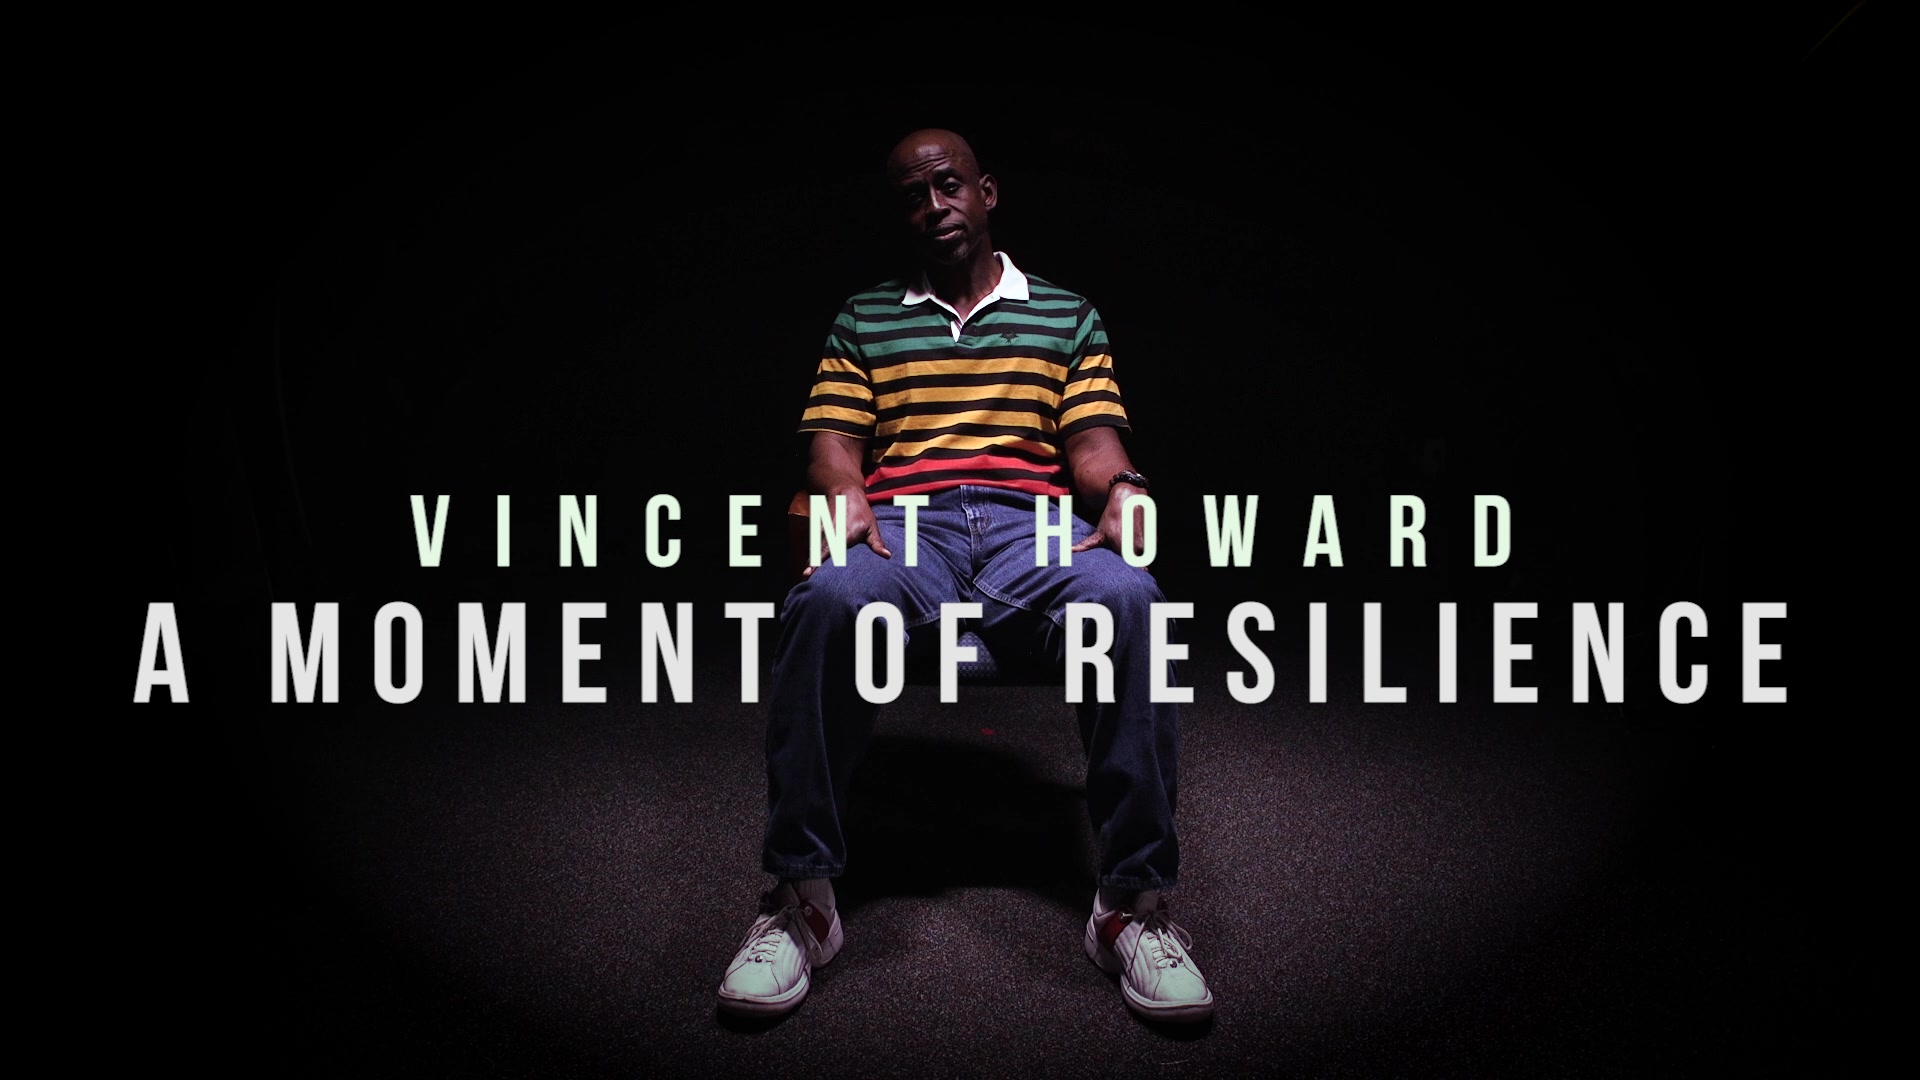 Vincent Howard talks about mindfulness during A Moment of Resilience